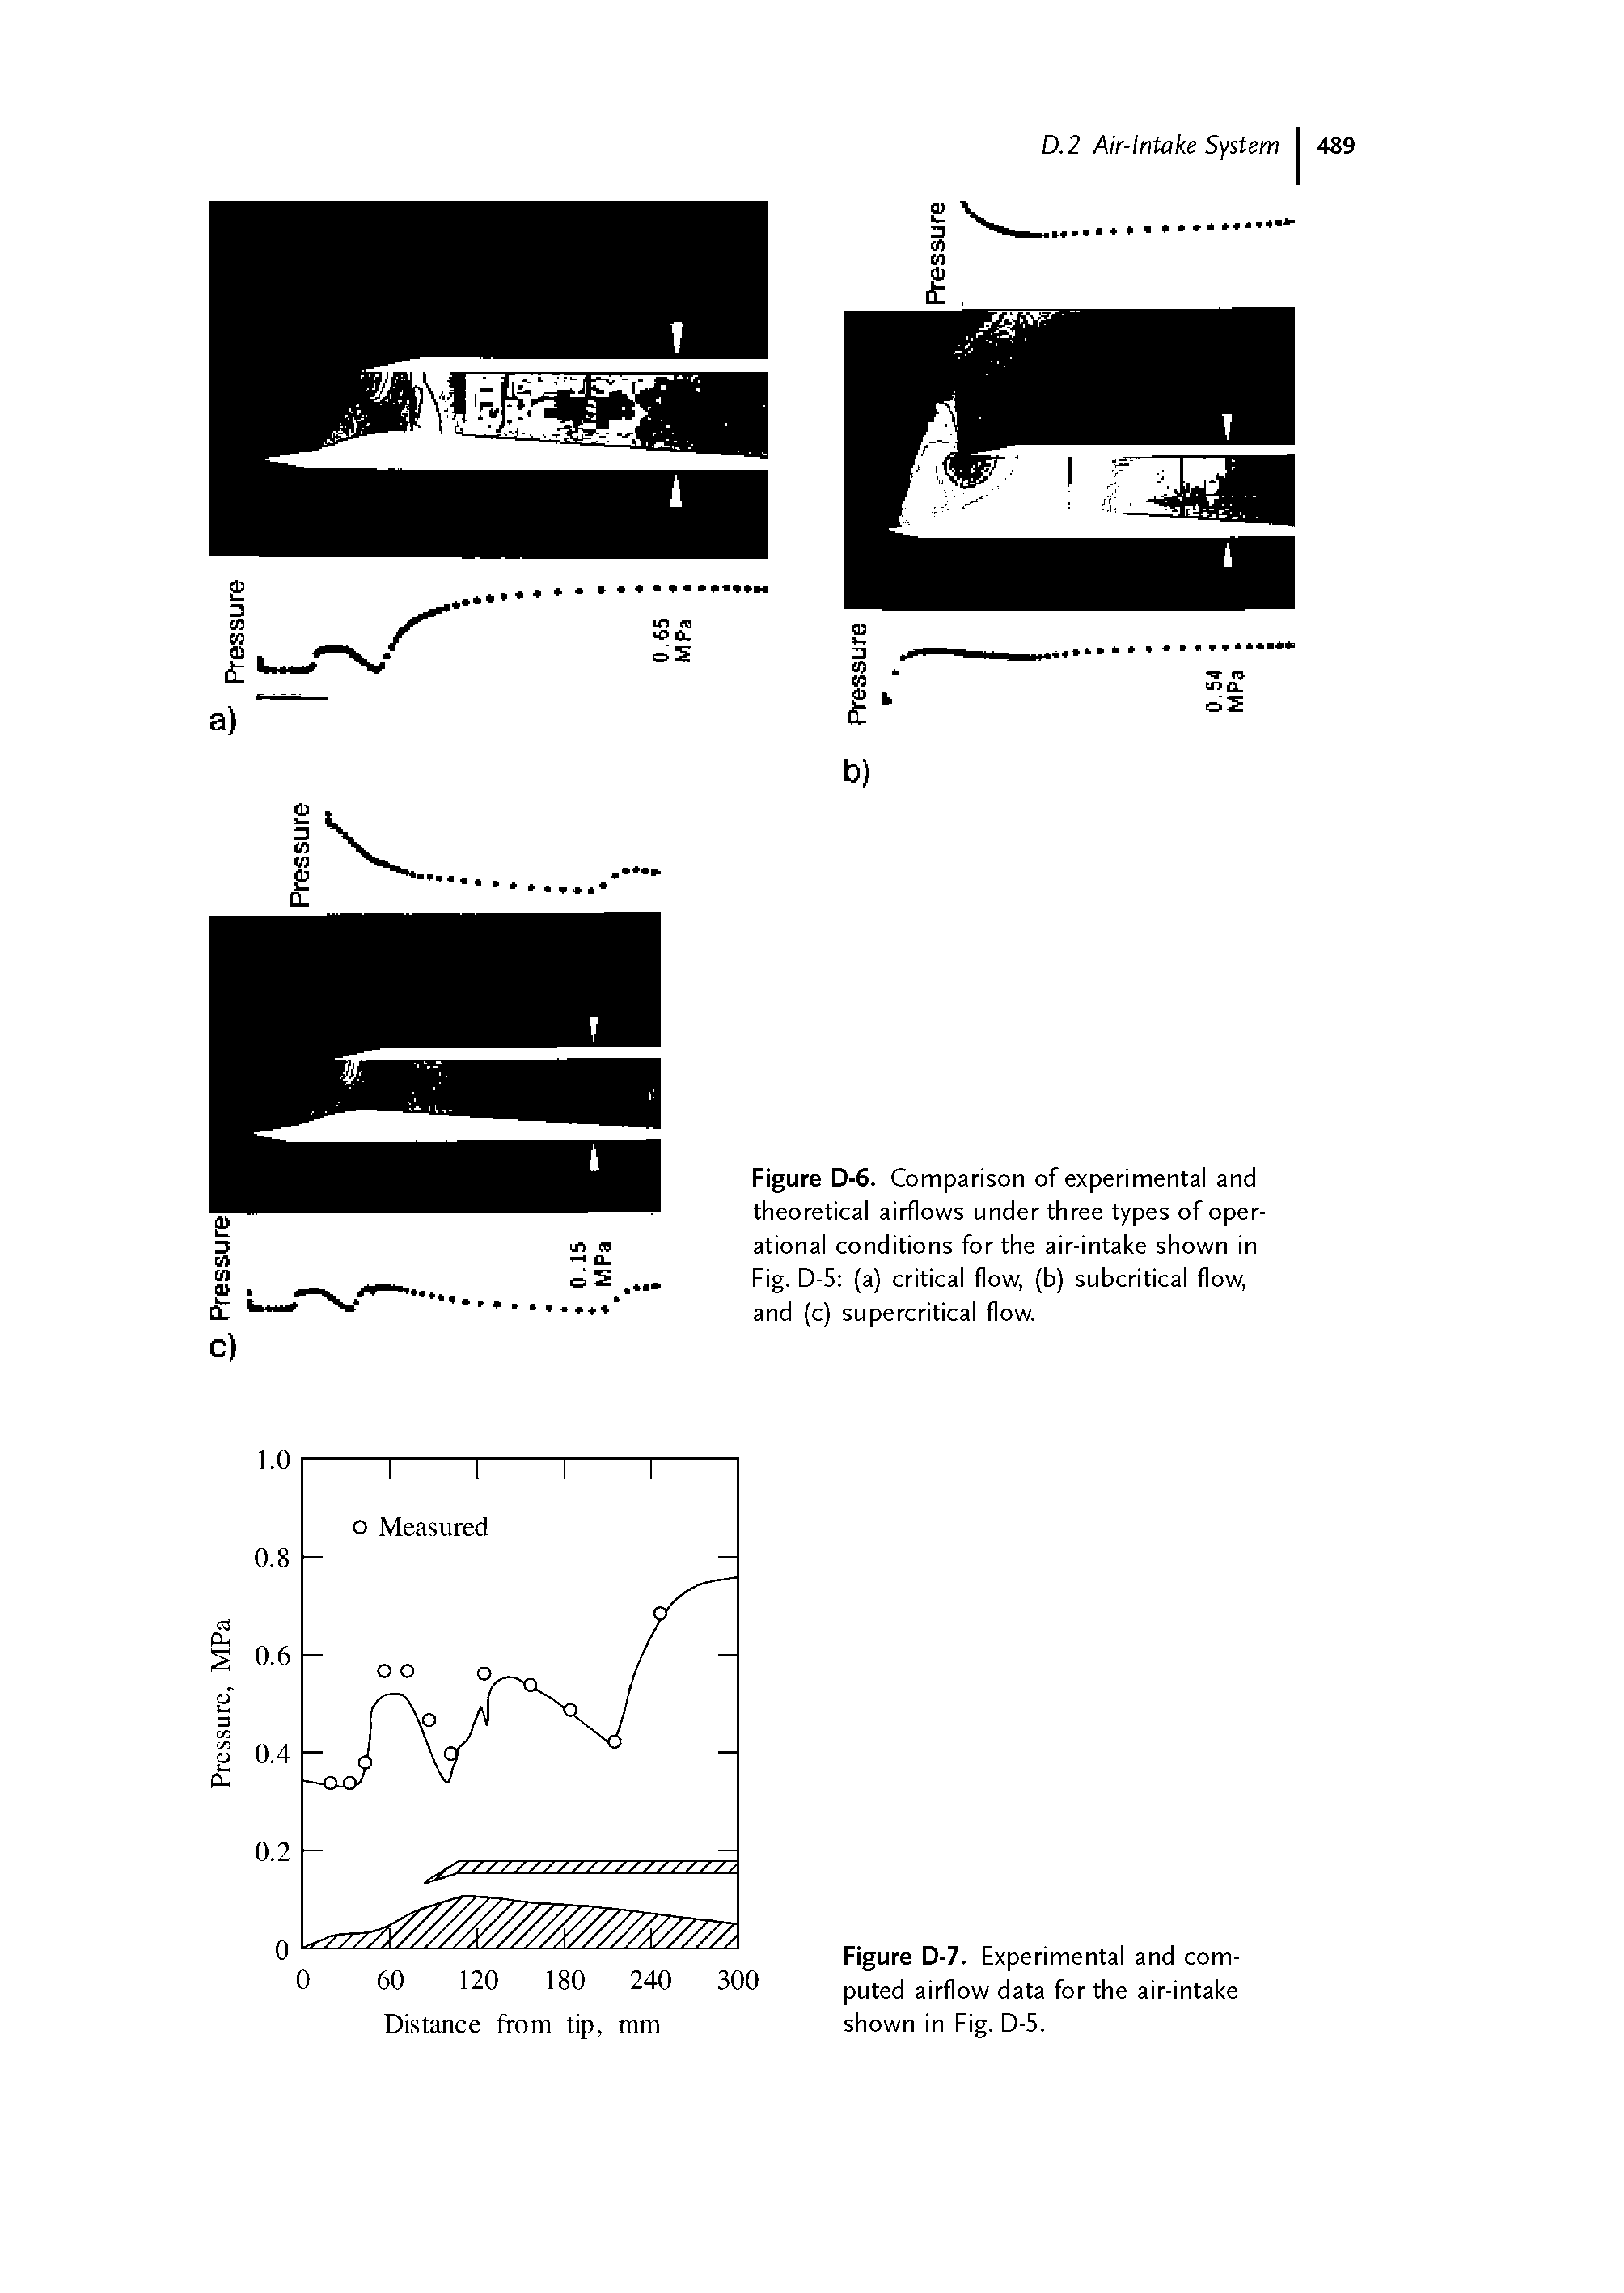 Figure D-6. Comparison of experimental and theoretical airflows under three types of operational conditions for the air-intake shown in Fig. D-5 (a) critical flow, (b) subcritical flow, and (c) supercritical flow.